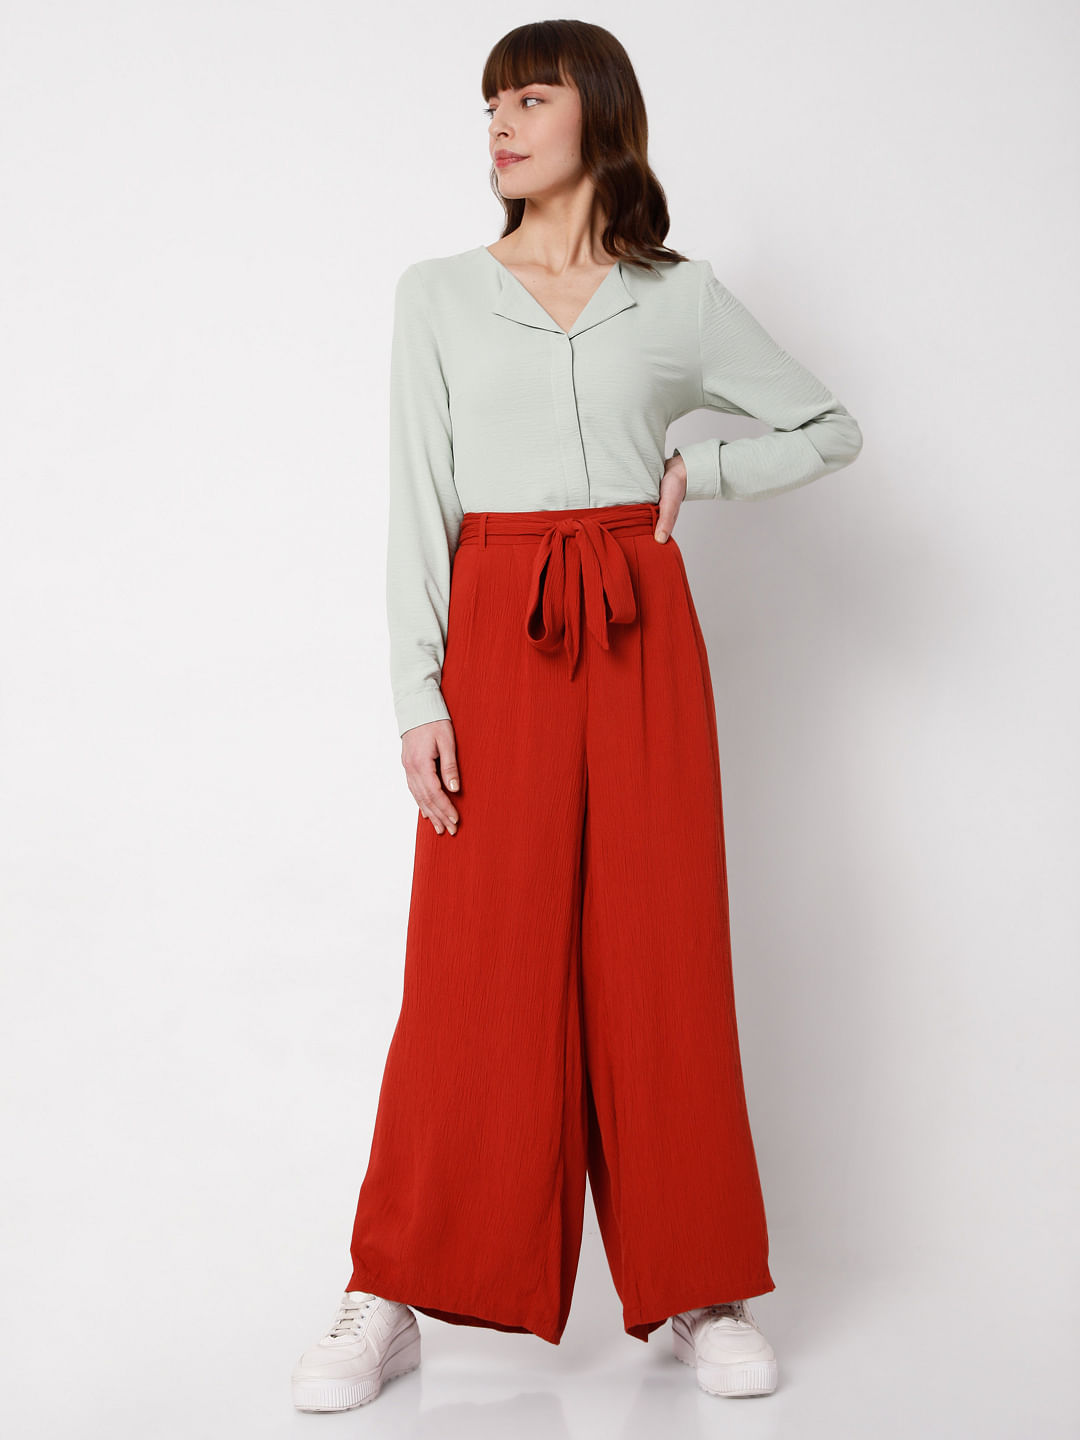 Classic and casual women's trousers (hijab online shop) - Brick color  Select size S